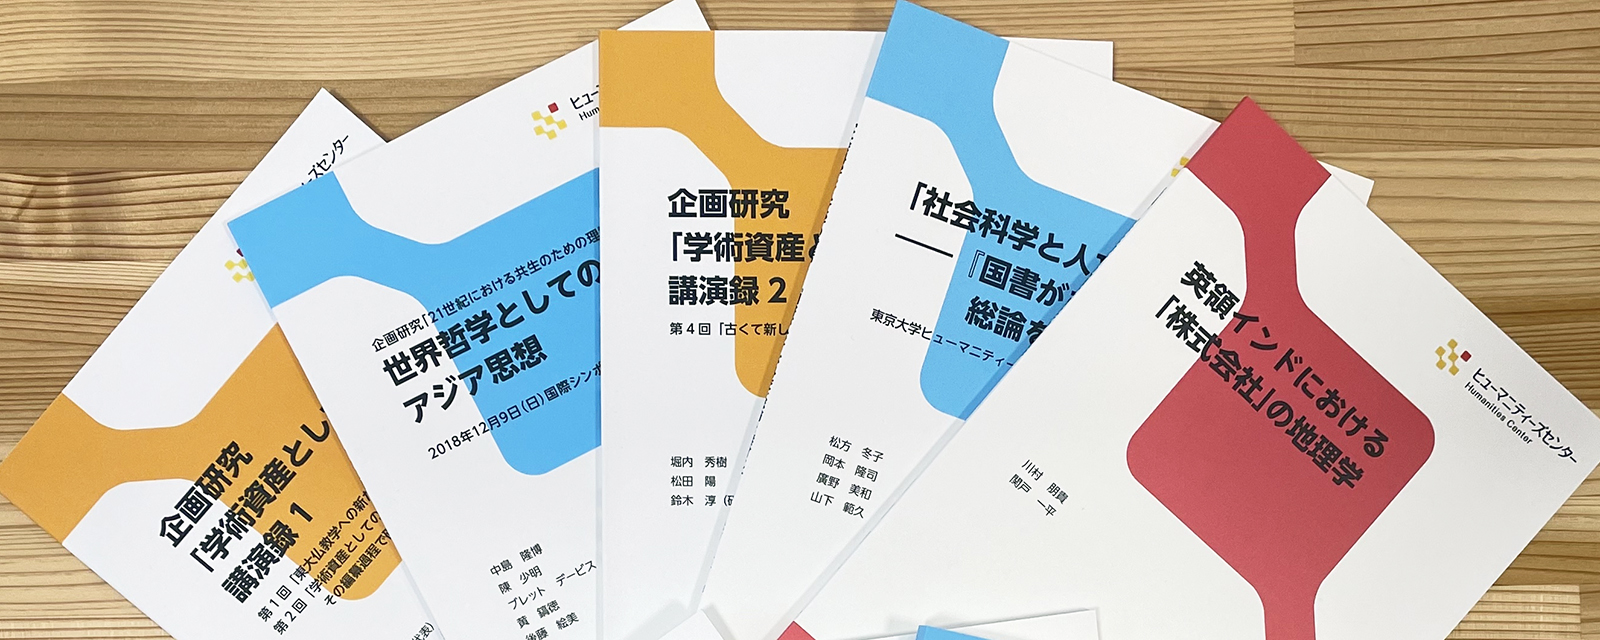 Humanities Center Booklet シリーズ